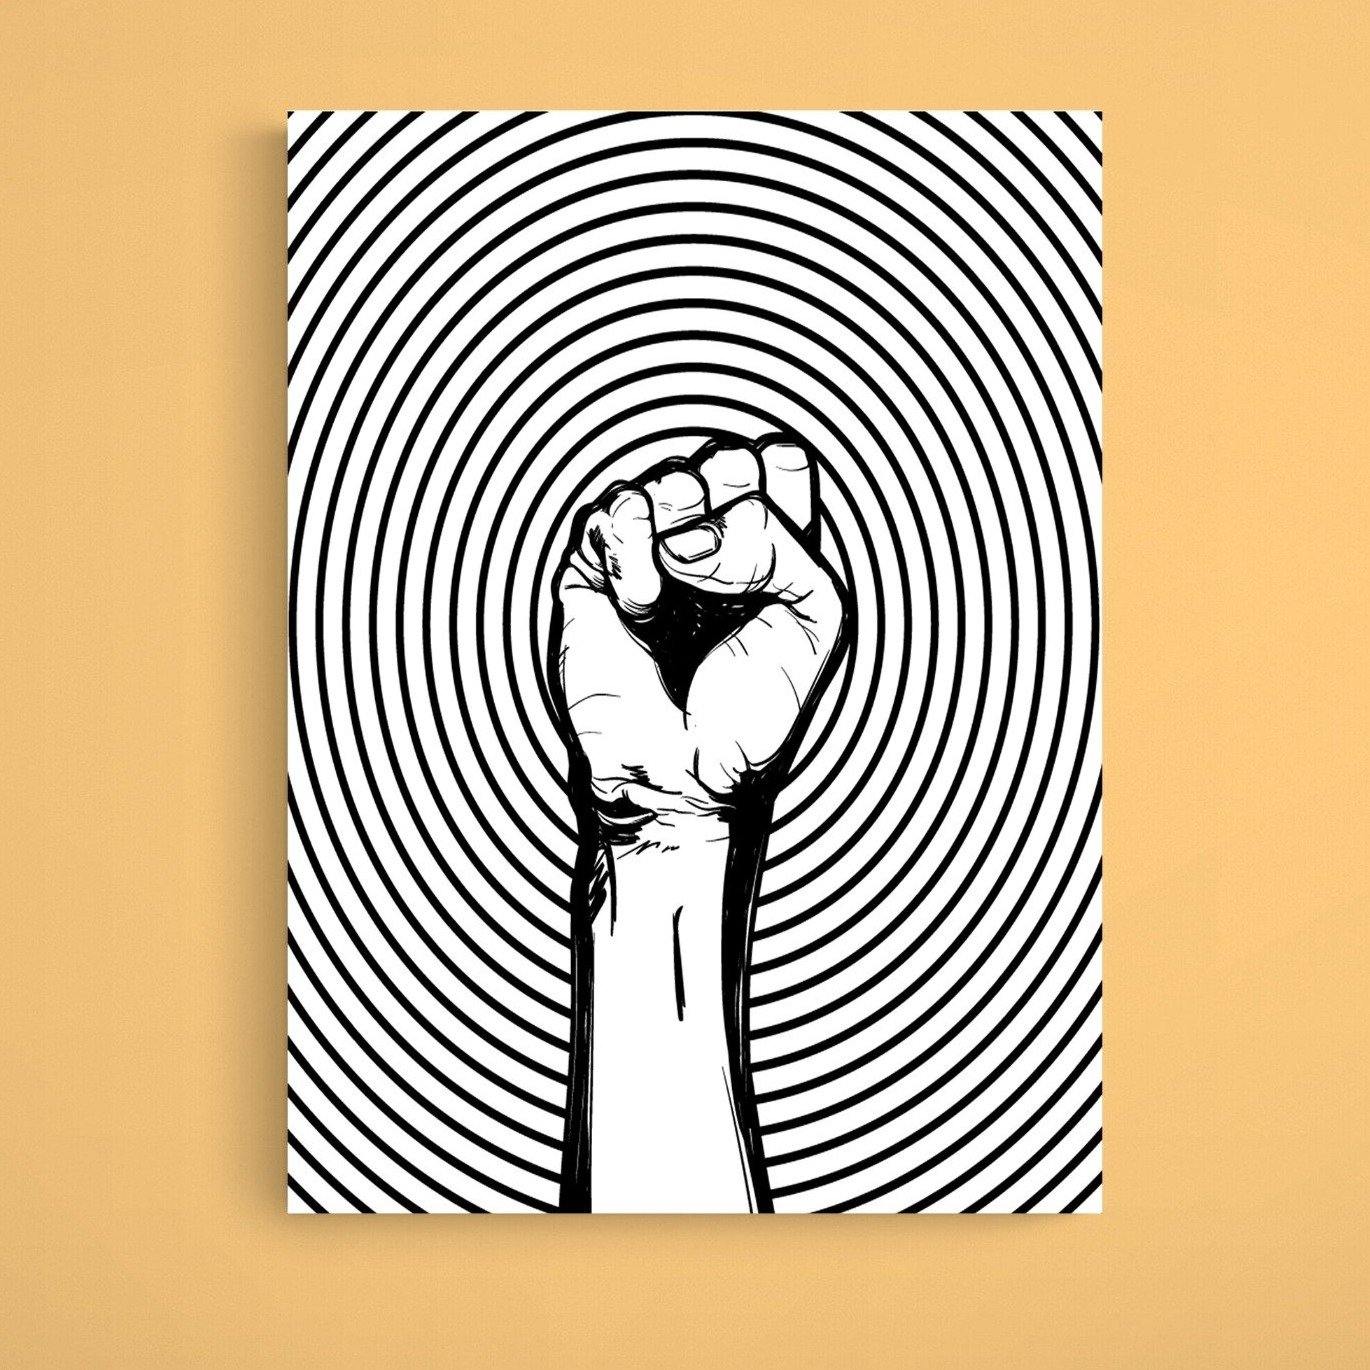 We Have the Power Black Lives Matter Print | Motivational Inspirational Racial | Harmony Equality Poster